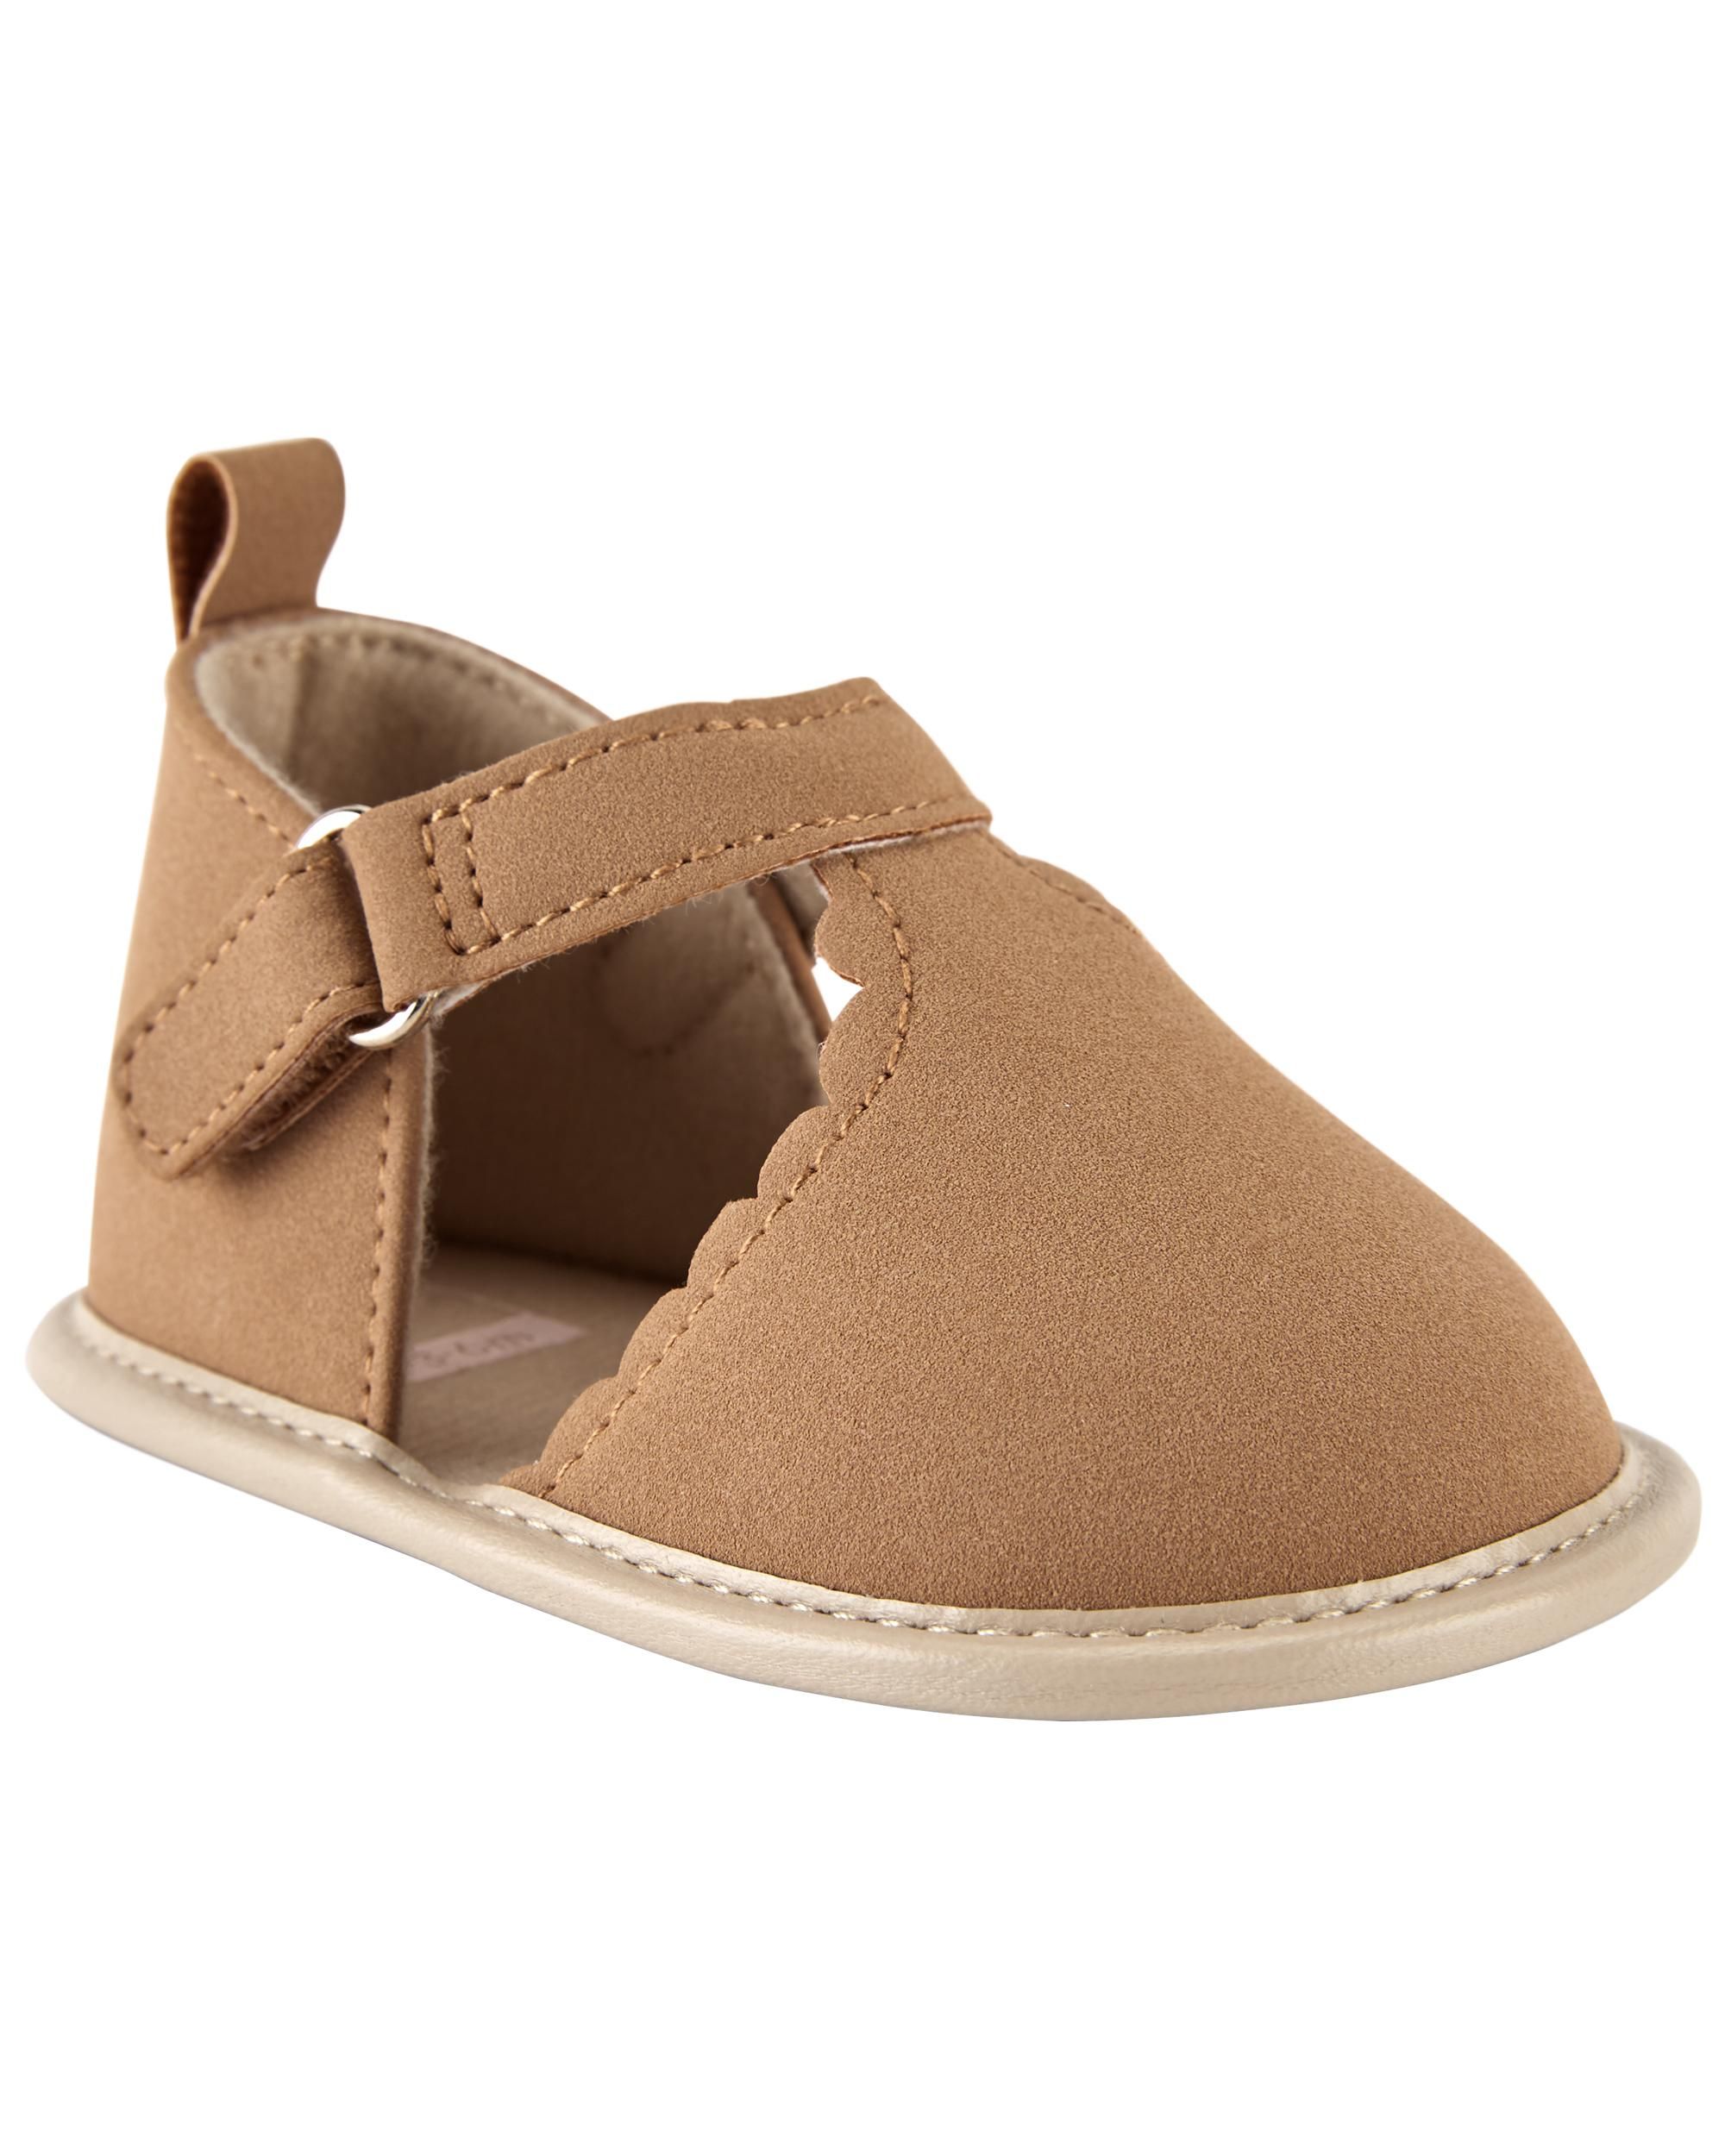 Baby Sandal Baby Shoes | Carter's